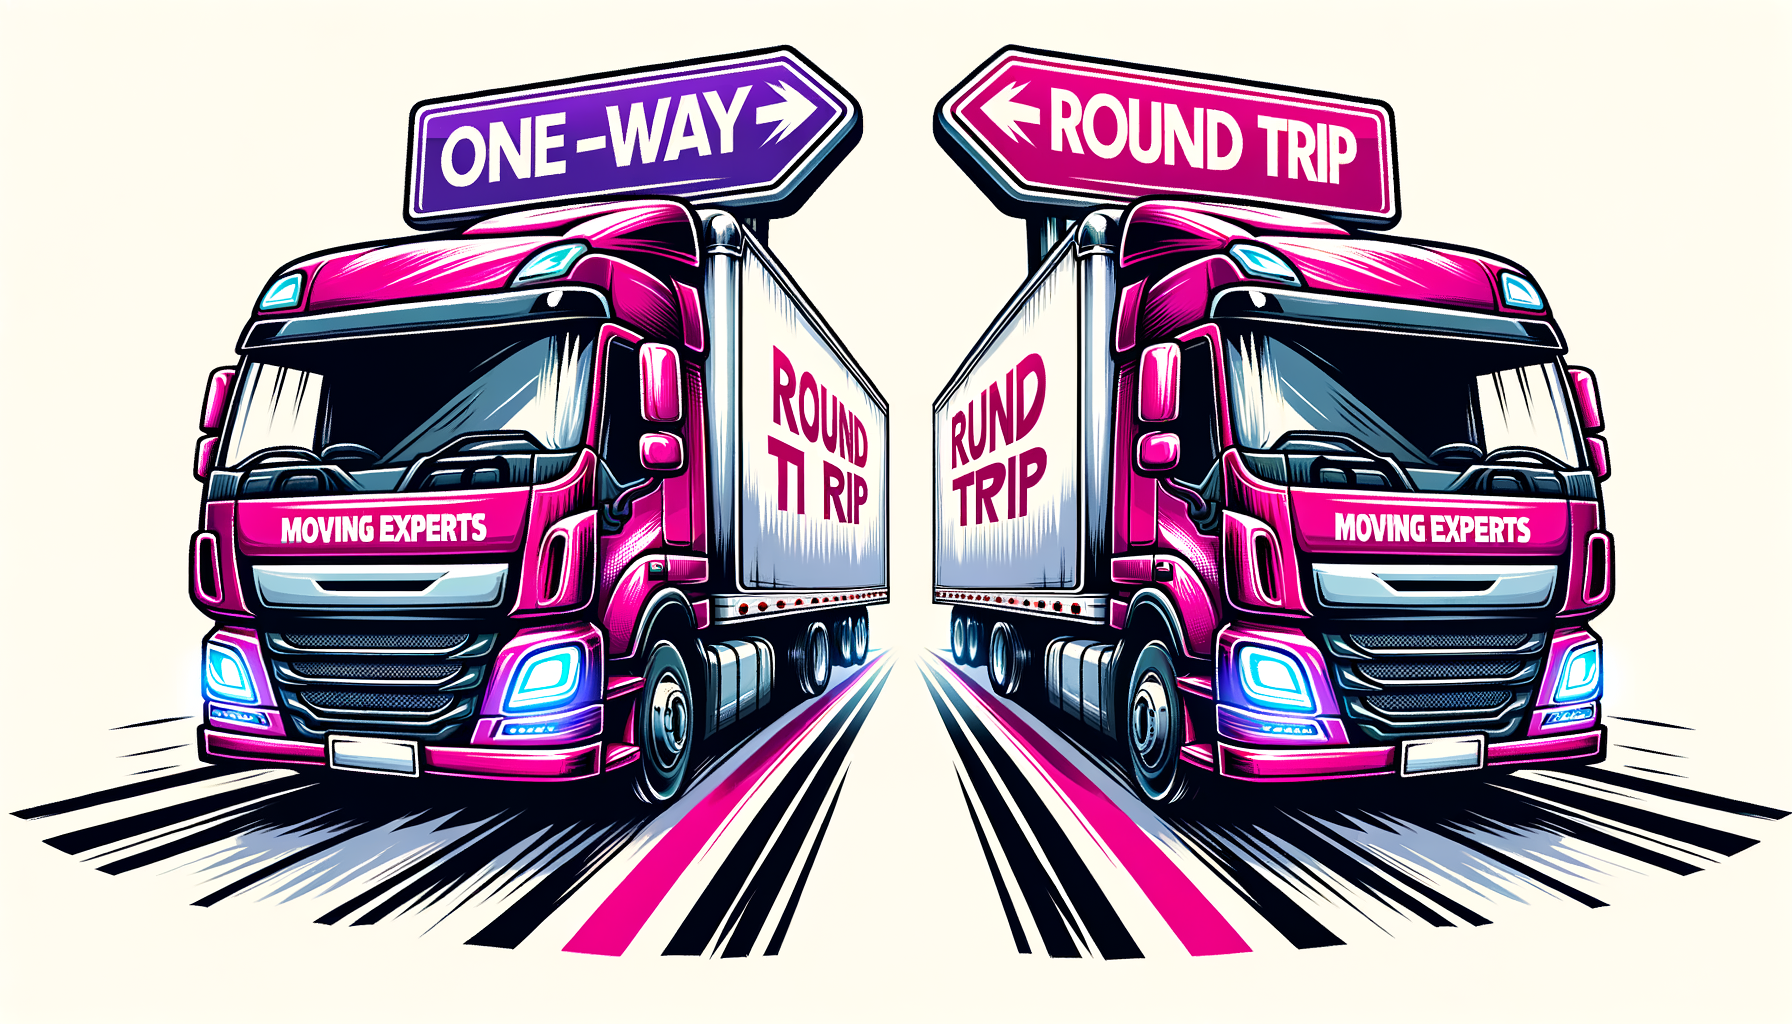 A fuschia colored cartoon image depicting one-way and round trip truck rentals.